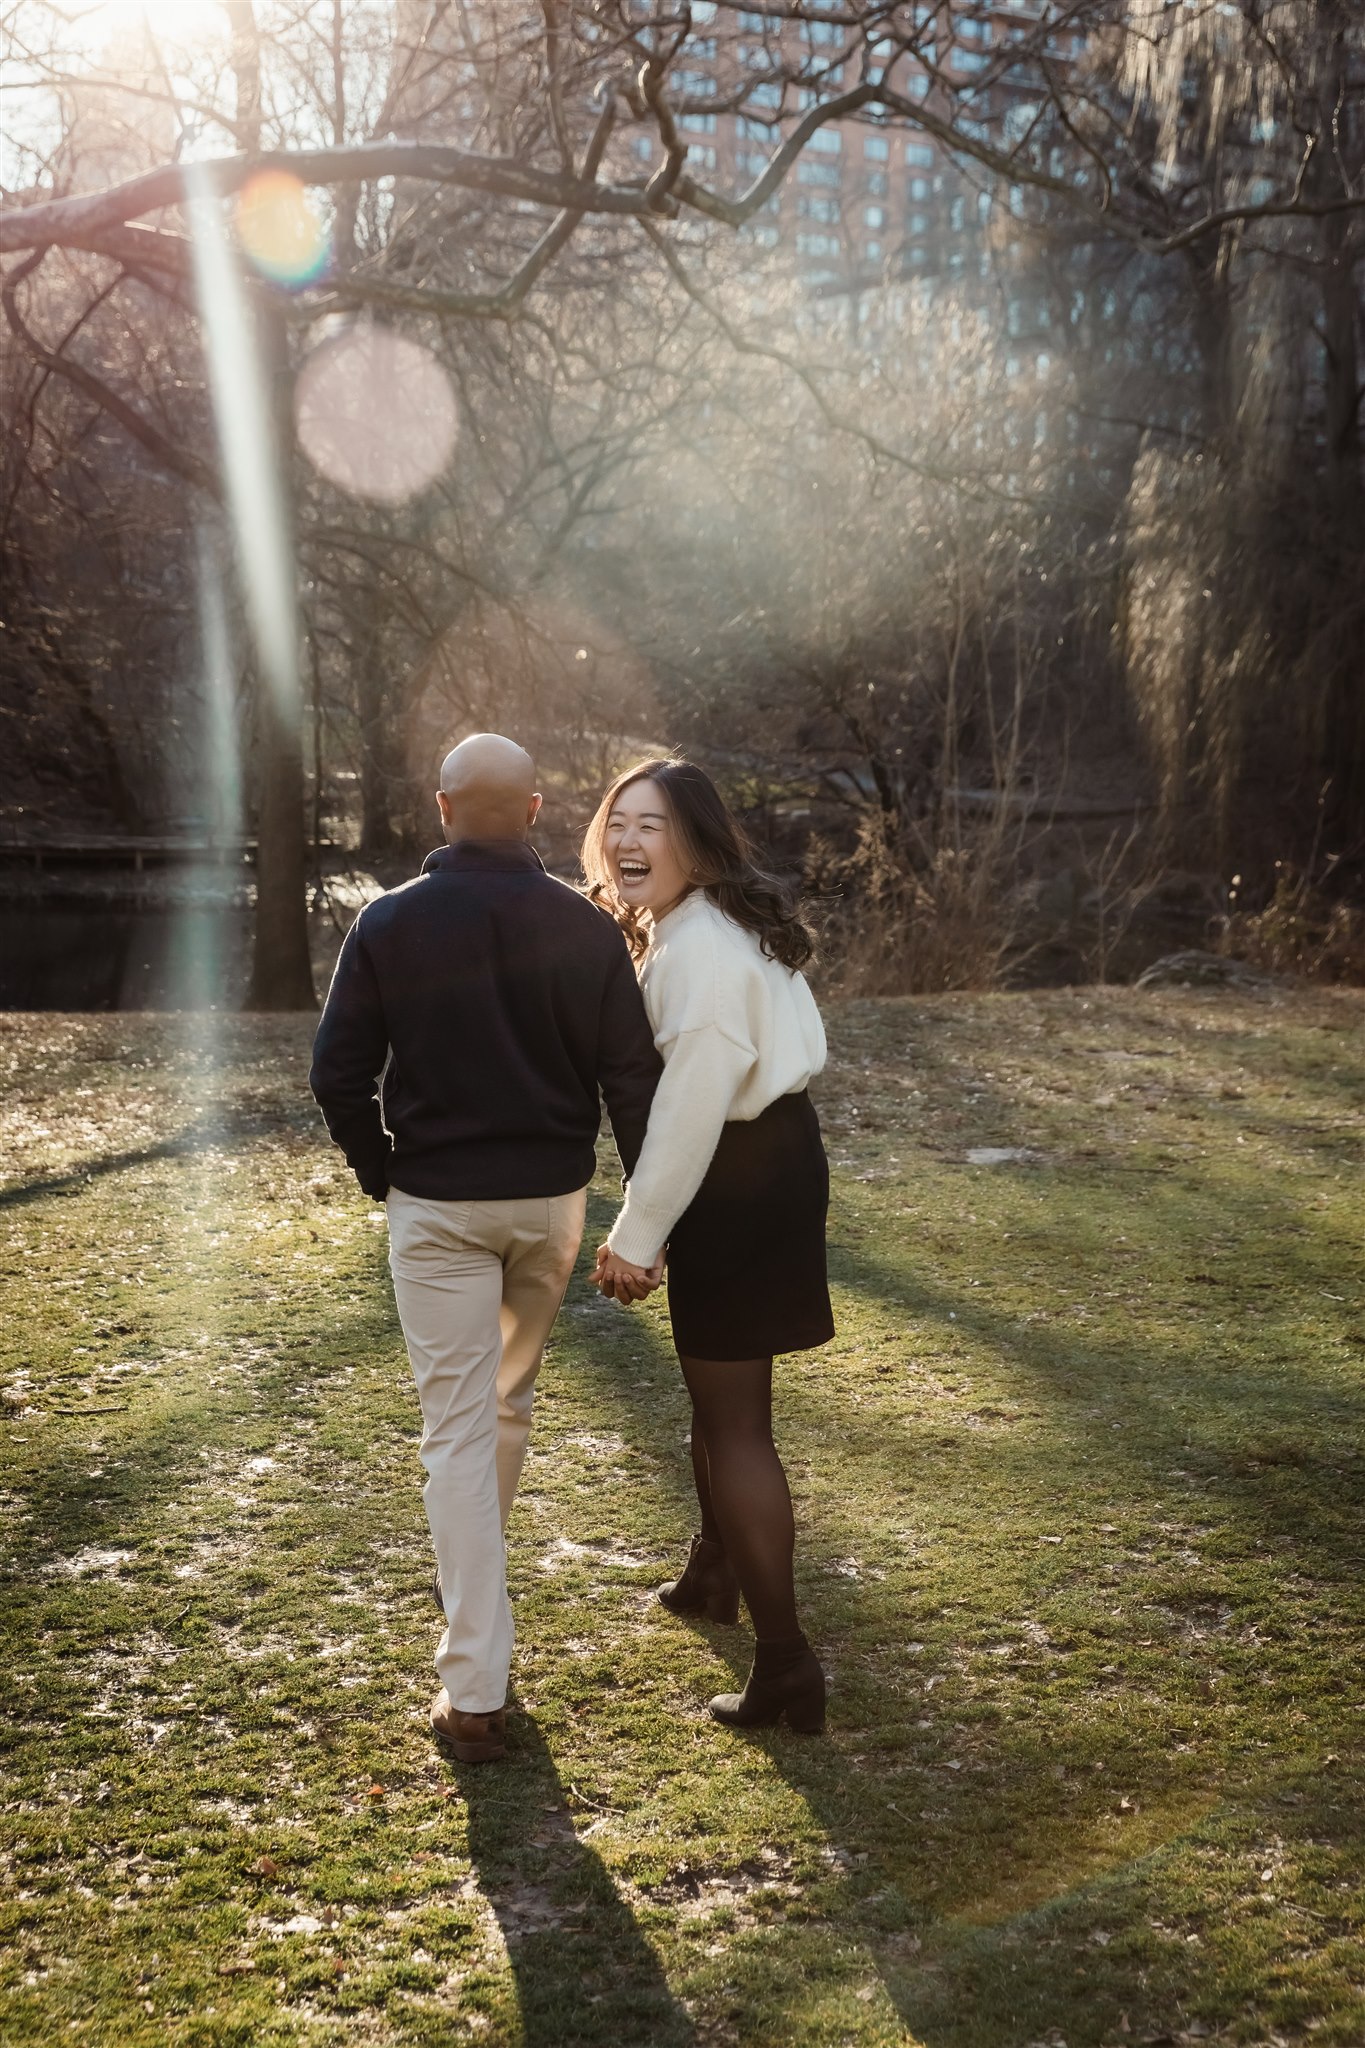 Central Park Winter Engagement Session - Jenn + Quincy - FEATURED